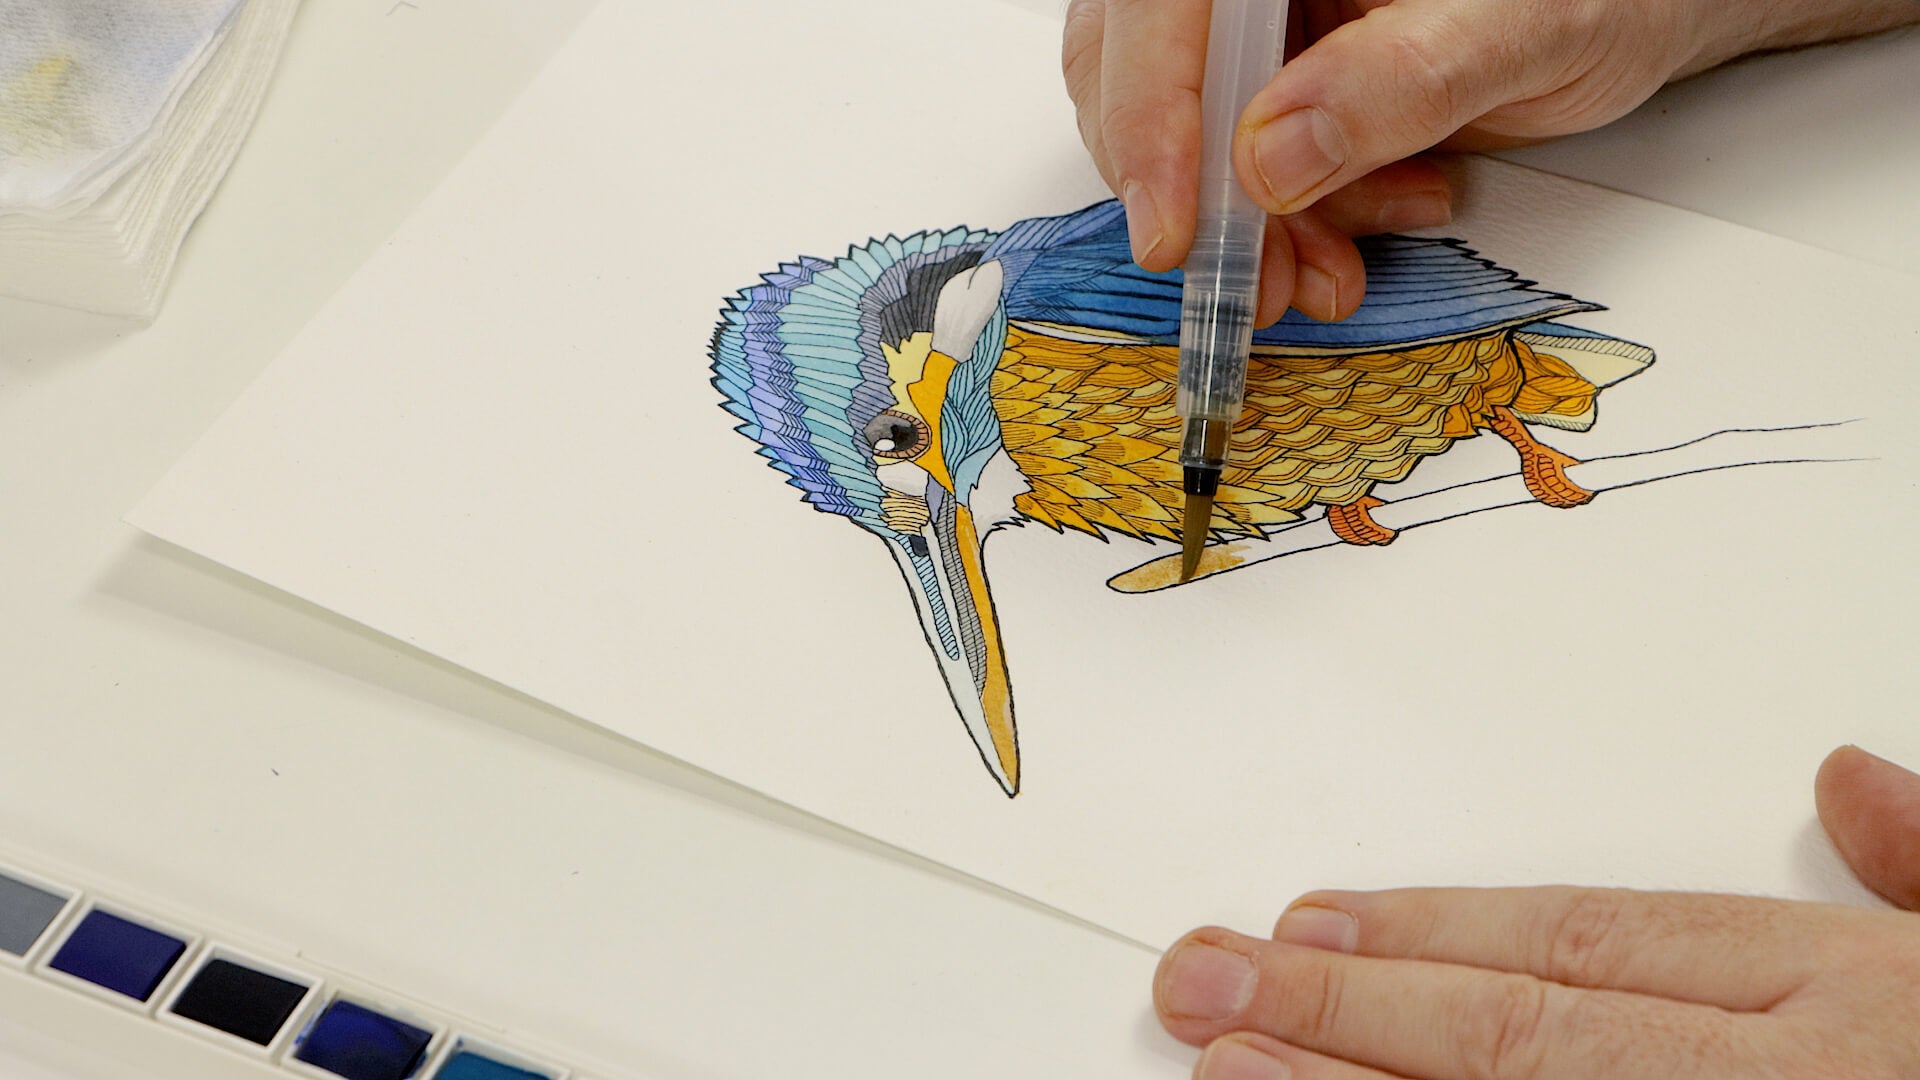 Hand holding a watercolour brush painting a stylised kingfisher artwork